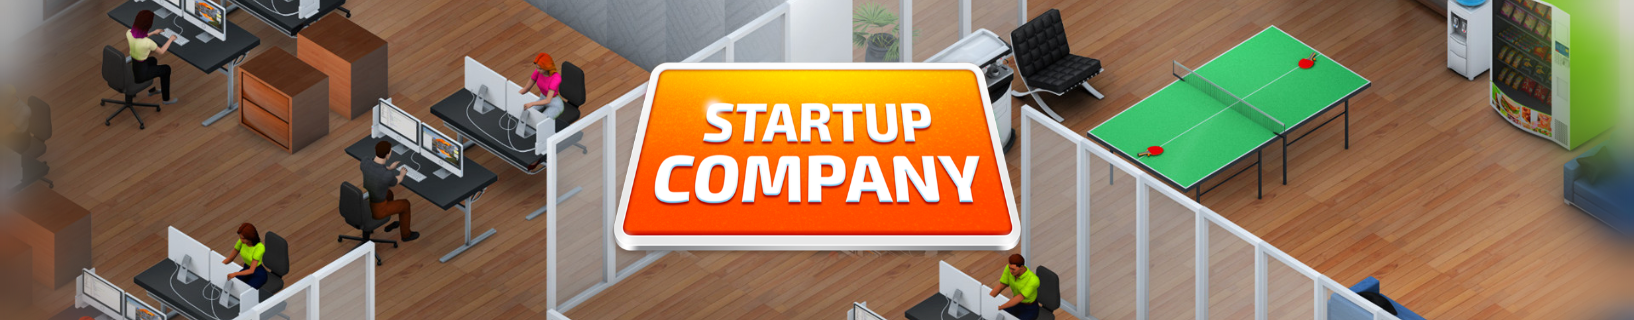 Startup Company, Banner